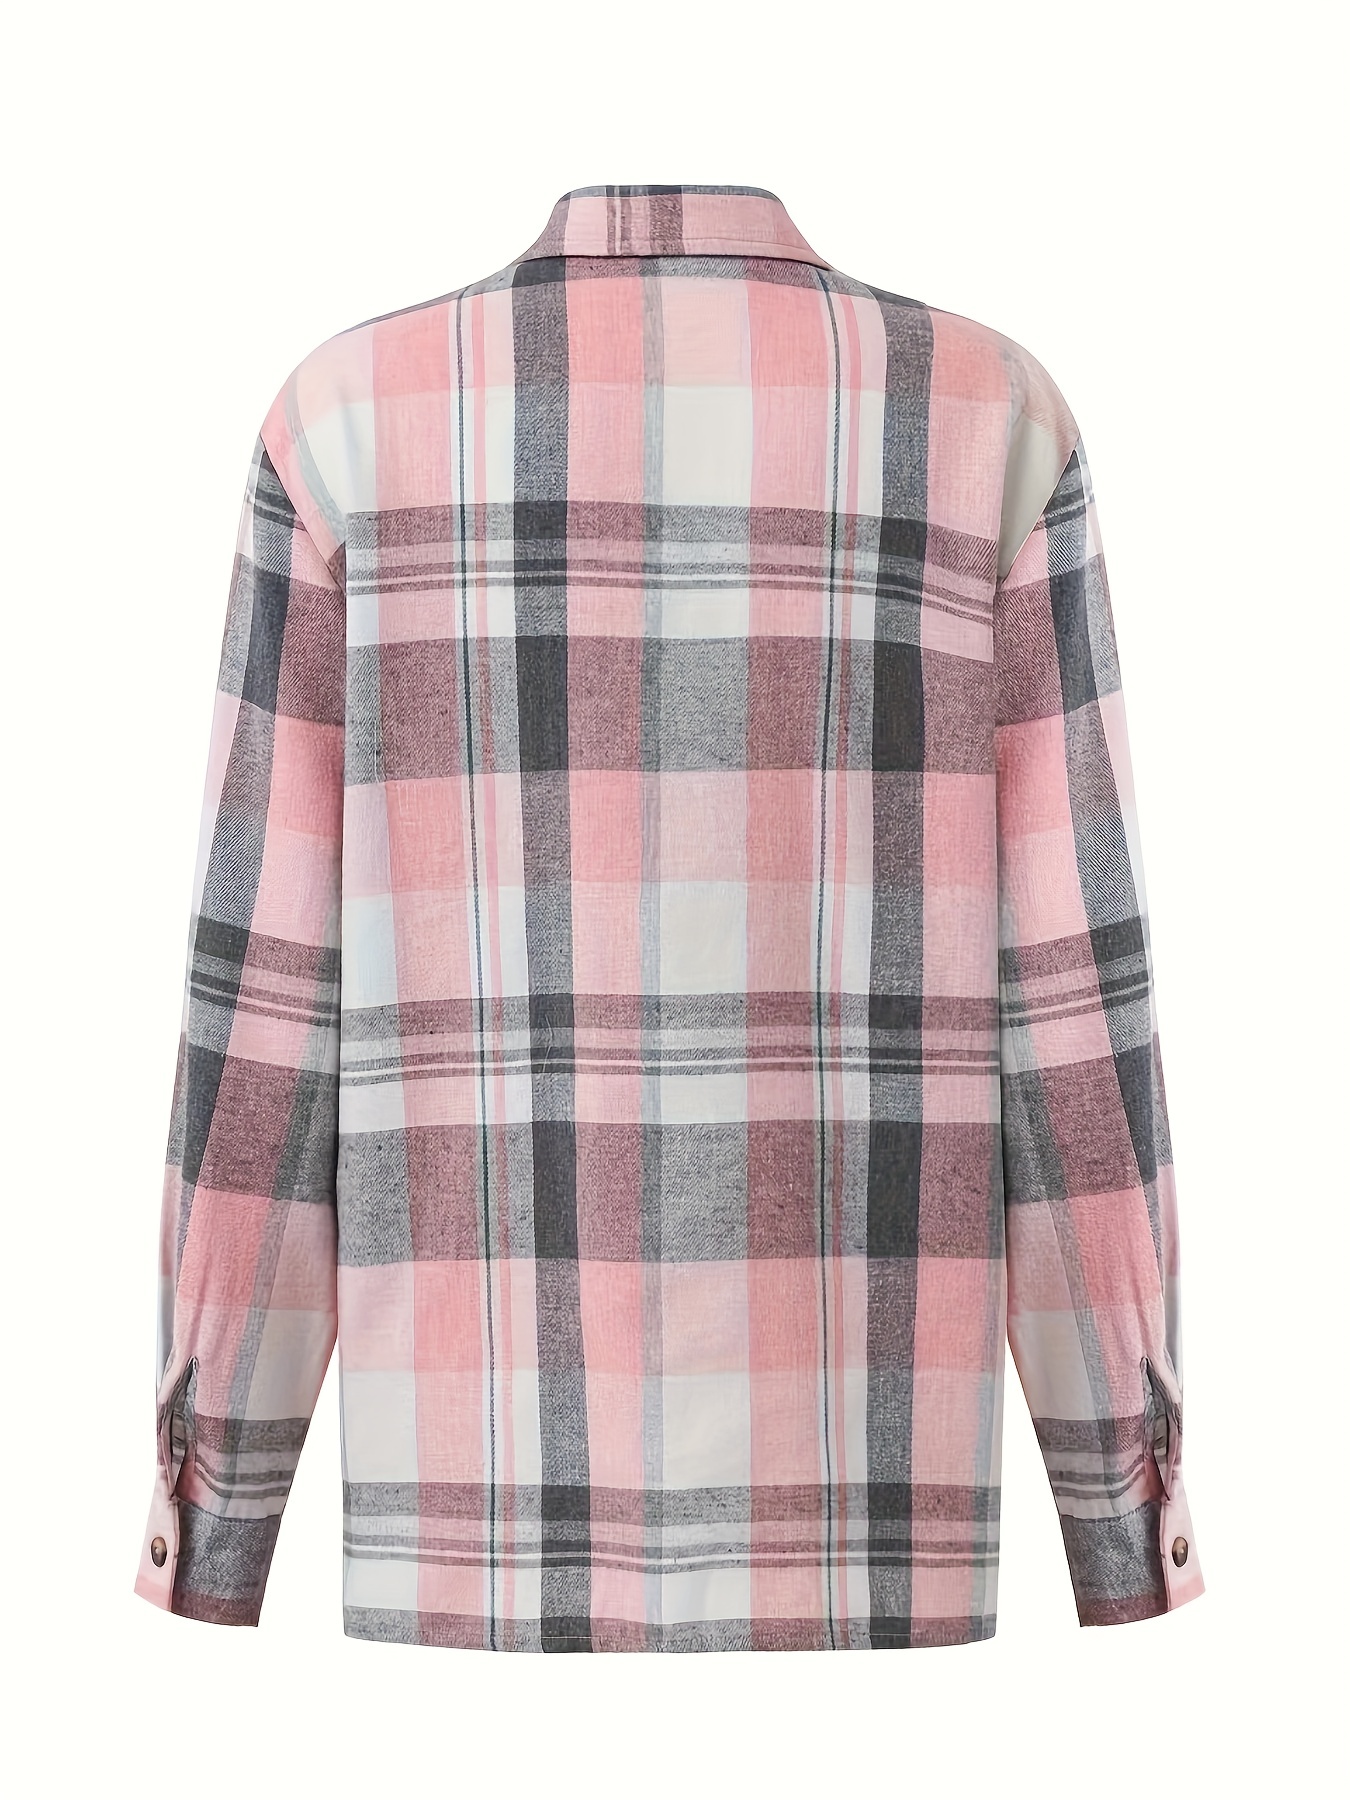 plaid print simple shirt casual button front long sleeve shirt womens clothing details 0